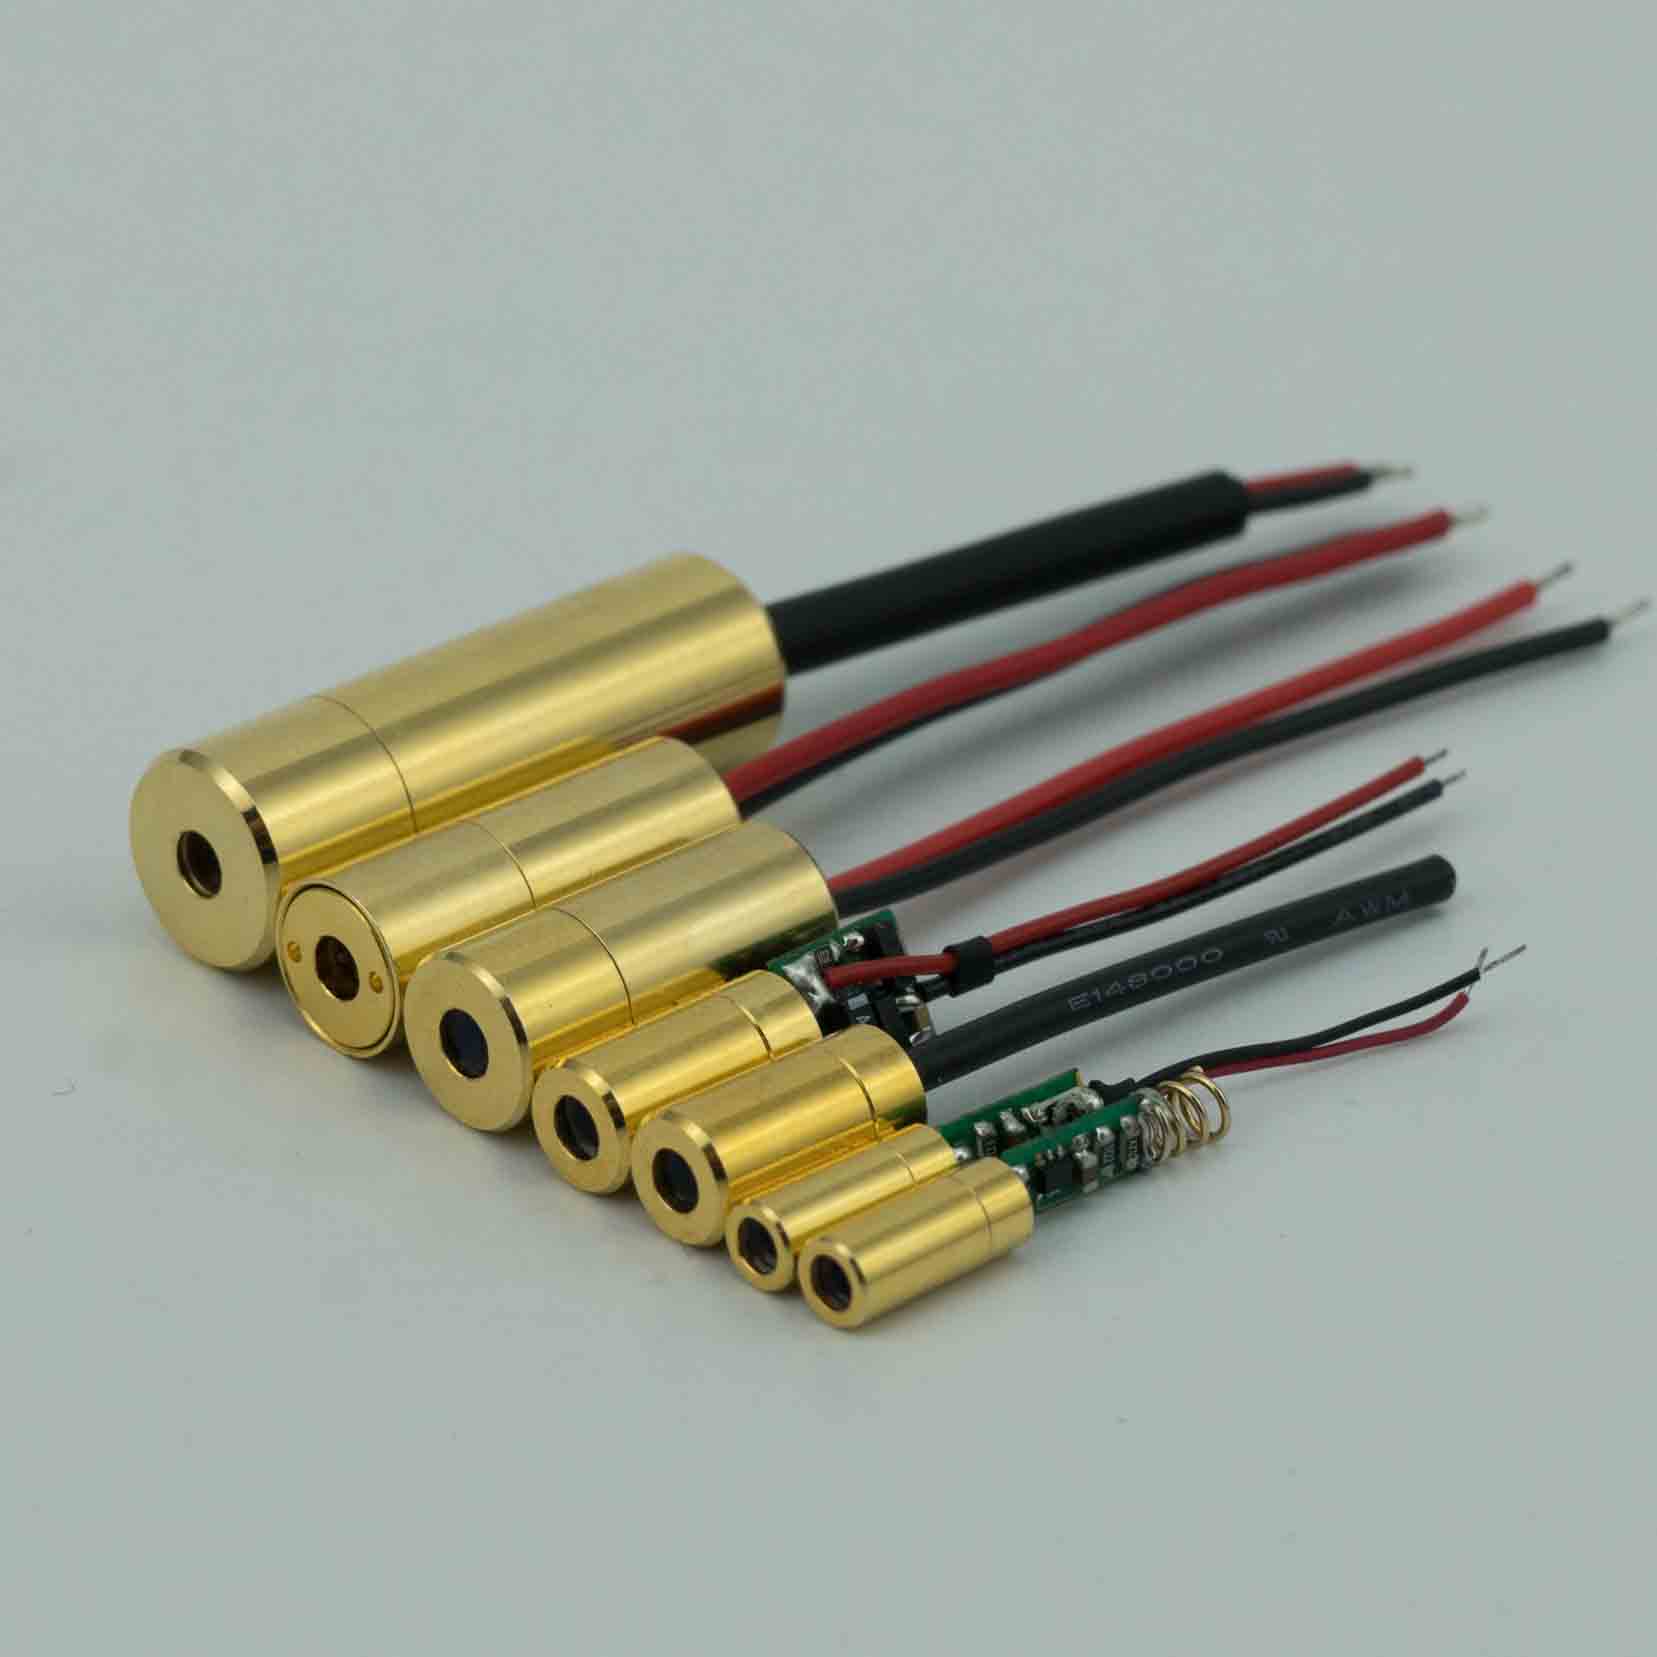 Alignment Laser Emitter Module 650nm 20mW Single Mode Lasers 